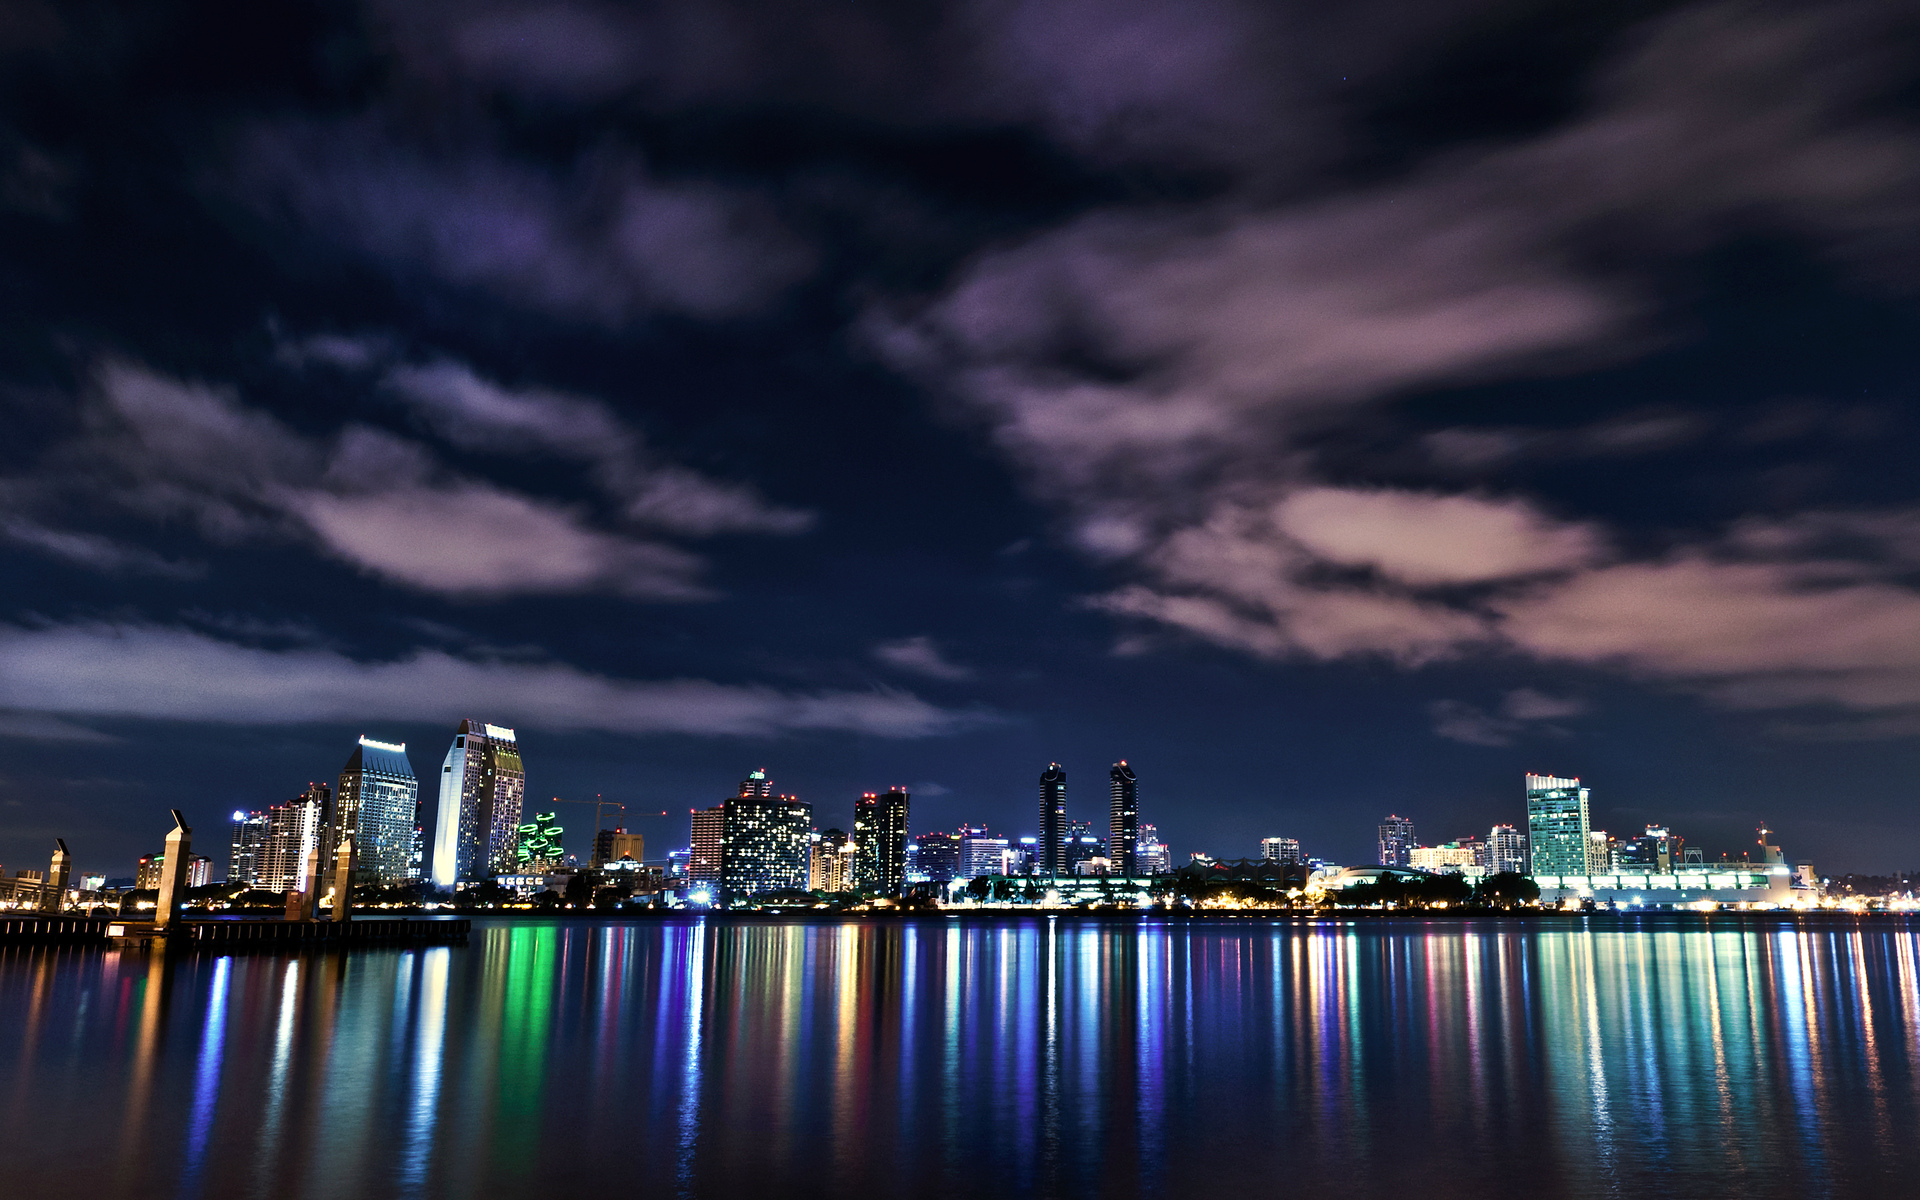 san, Diego, World, Architecture, Cities, Buildings, Skyscraper, Night, Lights, Window, Signs, Neon, Sky, Clouds, Hdr, Color, Water, Bay, Harbor, Sound, Reflection, Skyline, Cityscape Wallpaper